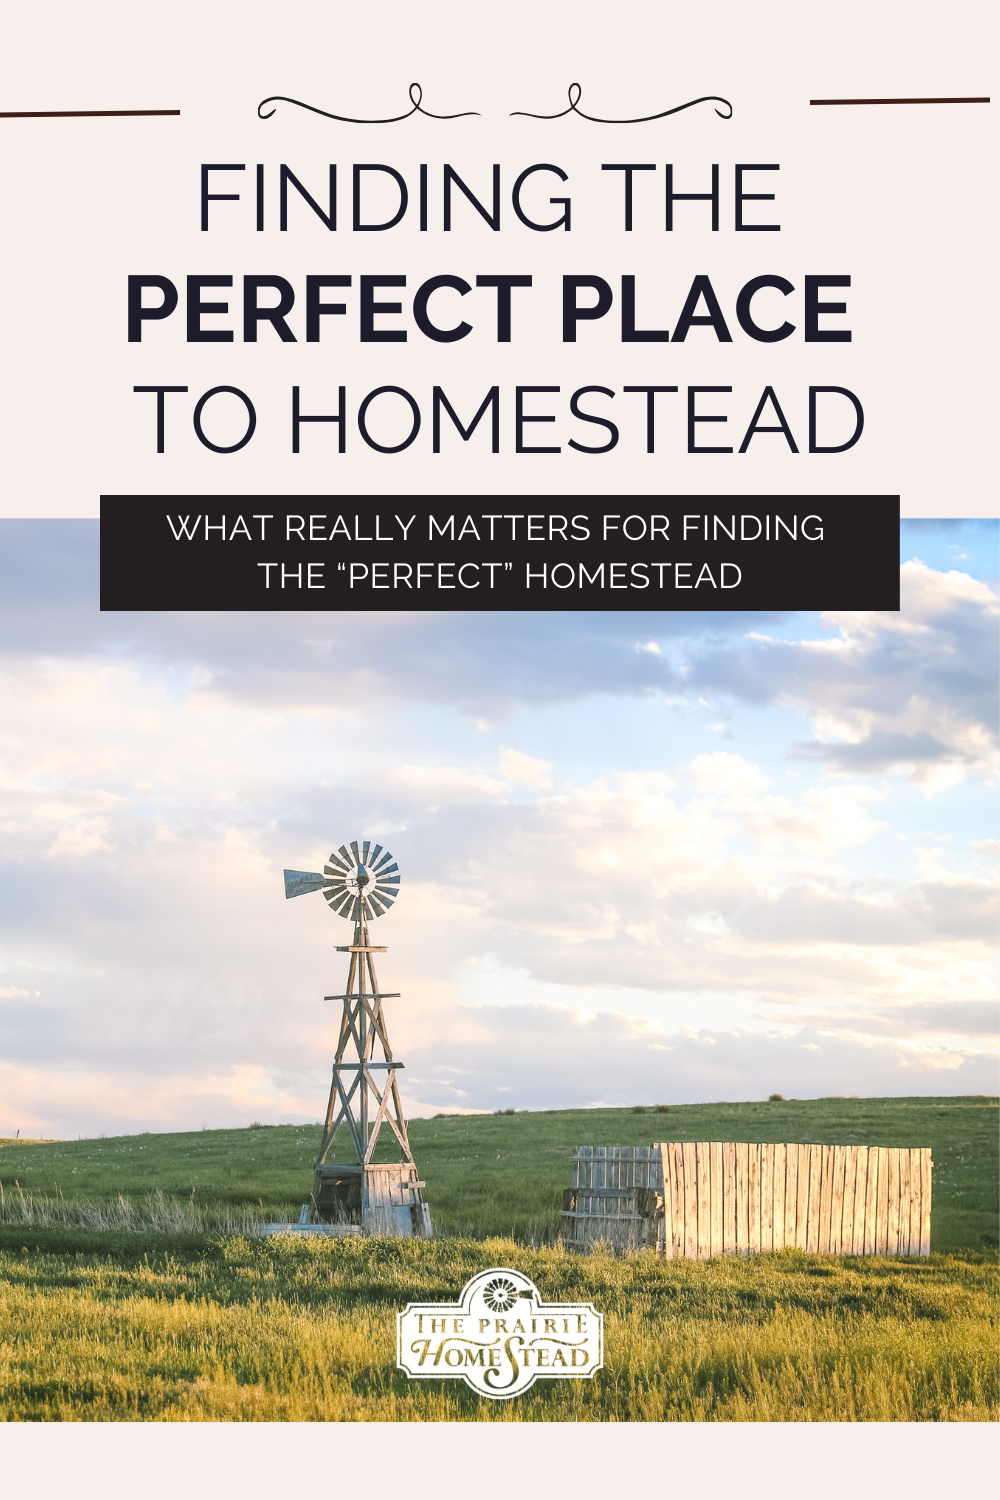 The Perfect Place to Homestead